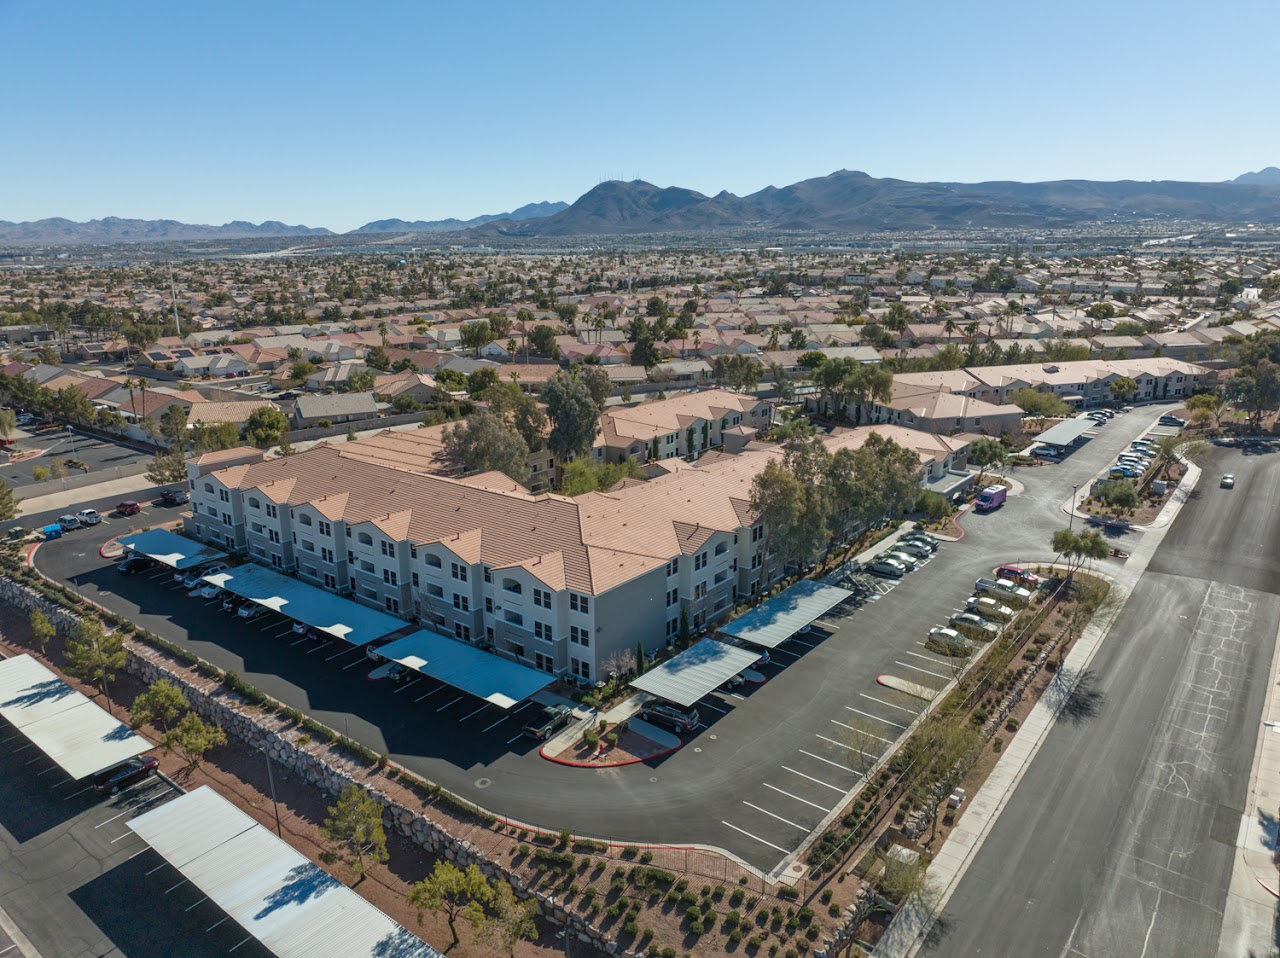 Photo of ANNABELLE PINES I. Affordable housing located at 320 ANNABELLE LN HENDERSON, NV 89014